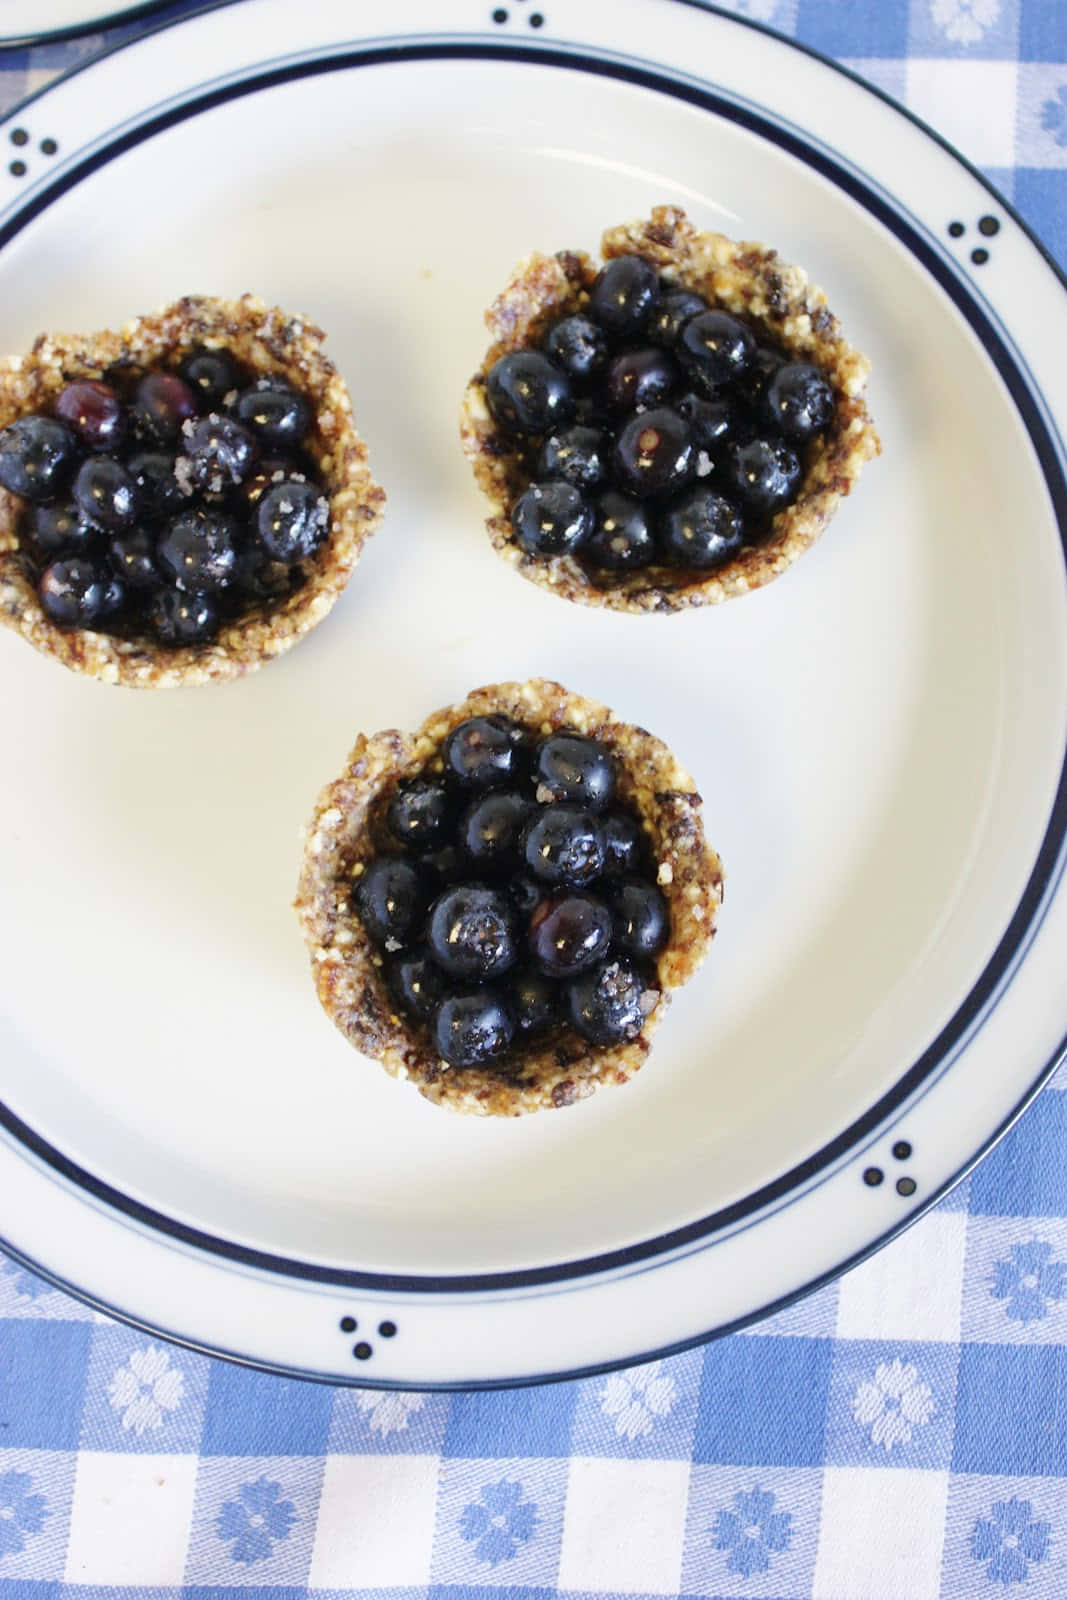 Tempt your taste buds with this scrumptious Blueberry Tart. Wallpaper